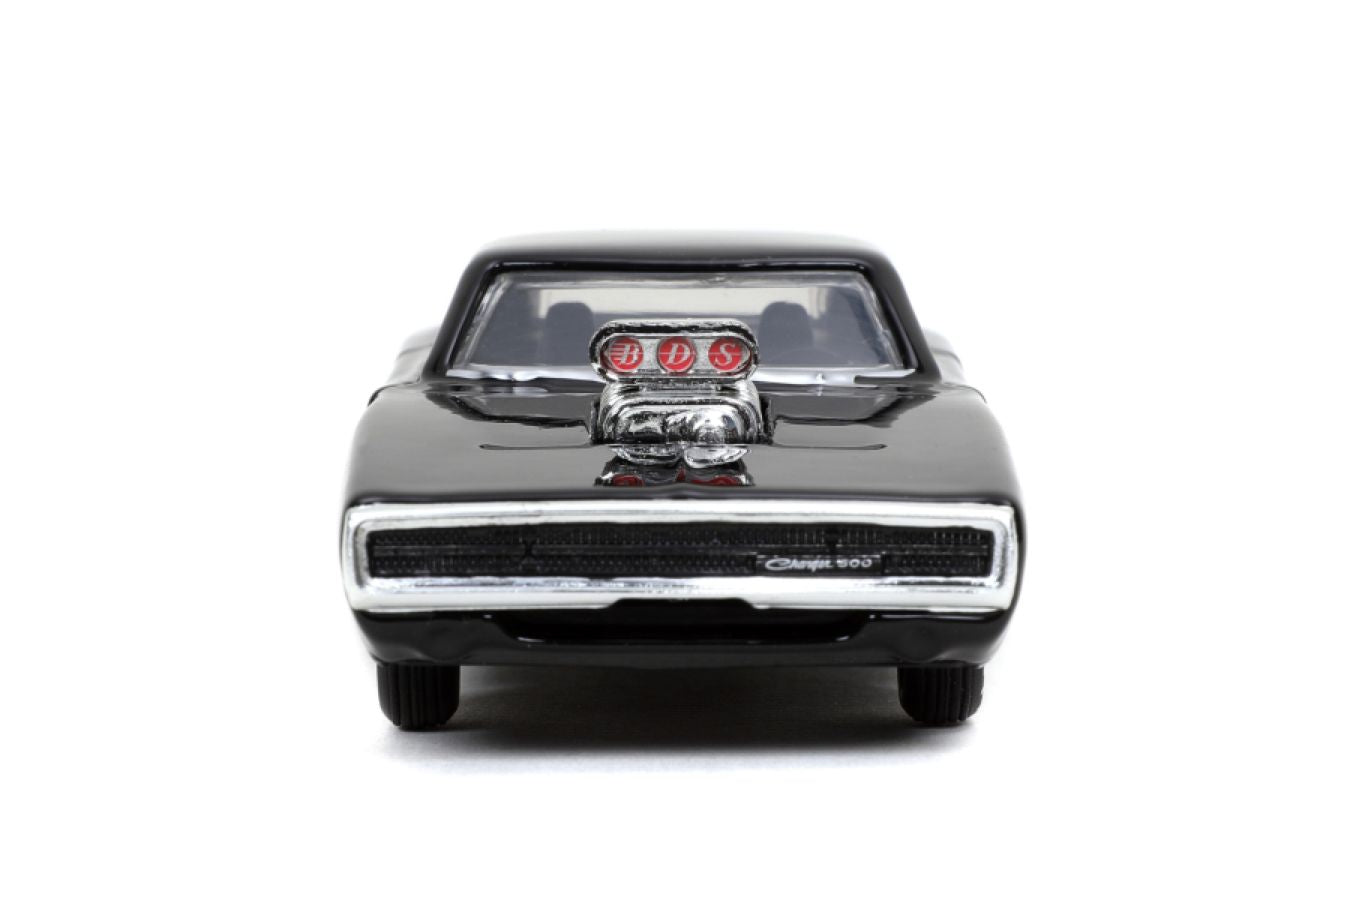 Fast and Furious 9 - 1970 Dodge Charger Black 1:32 Scale Hollywood Ride